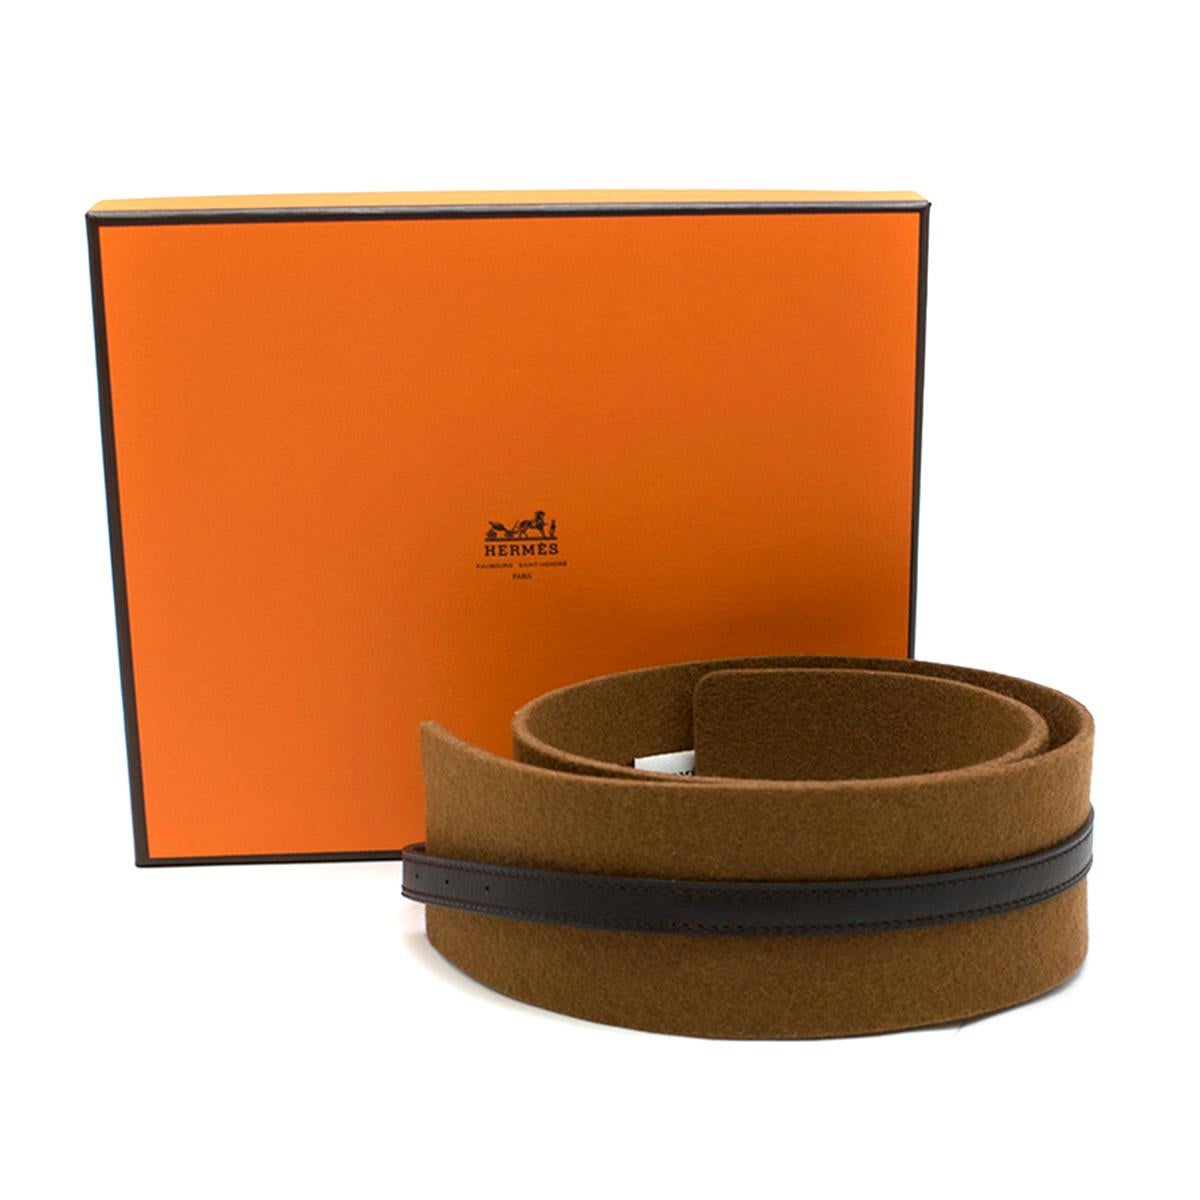 Hermes Brown Leather & Tan Wool Felt Belt

- wool felt large body with thin leather strap
- 3 adjustable belt holes 
- small palladium buckle

Please note, these items are pre-owned and may show some signs of storage, even when unworn and unused.